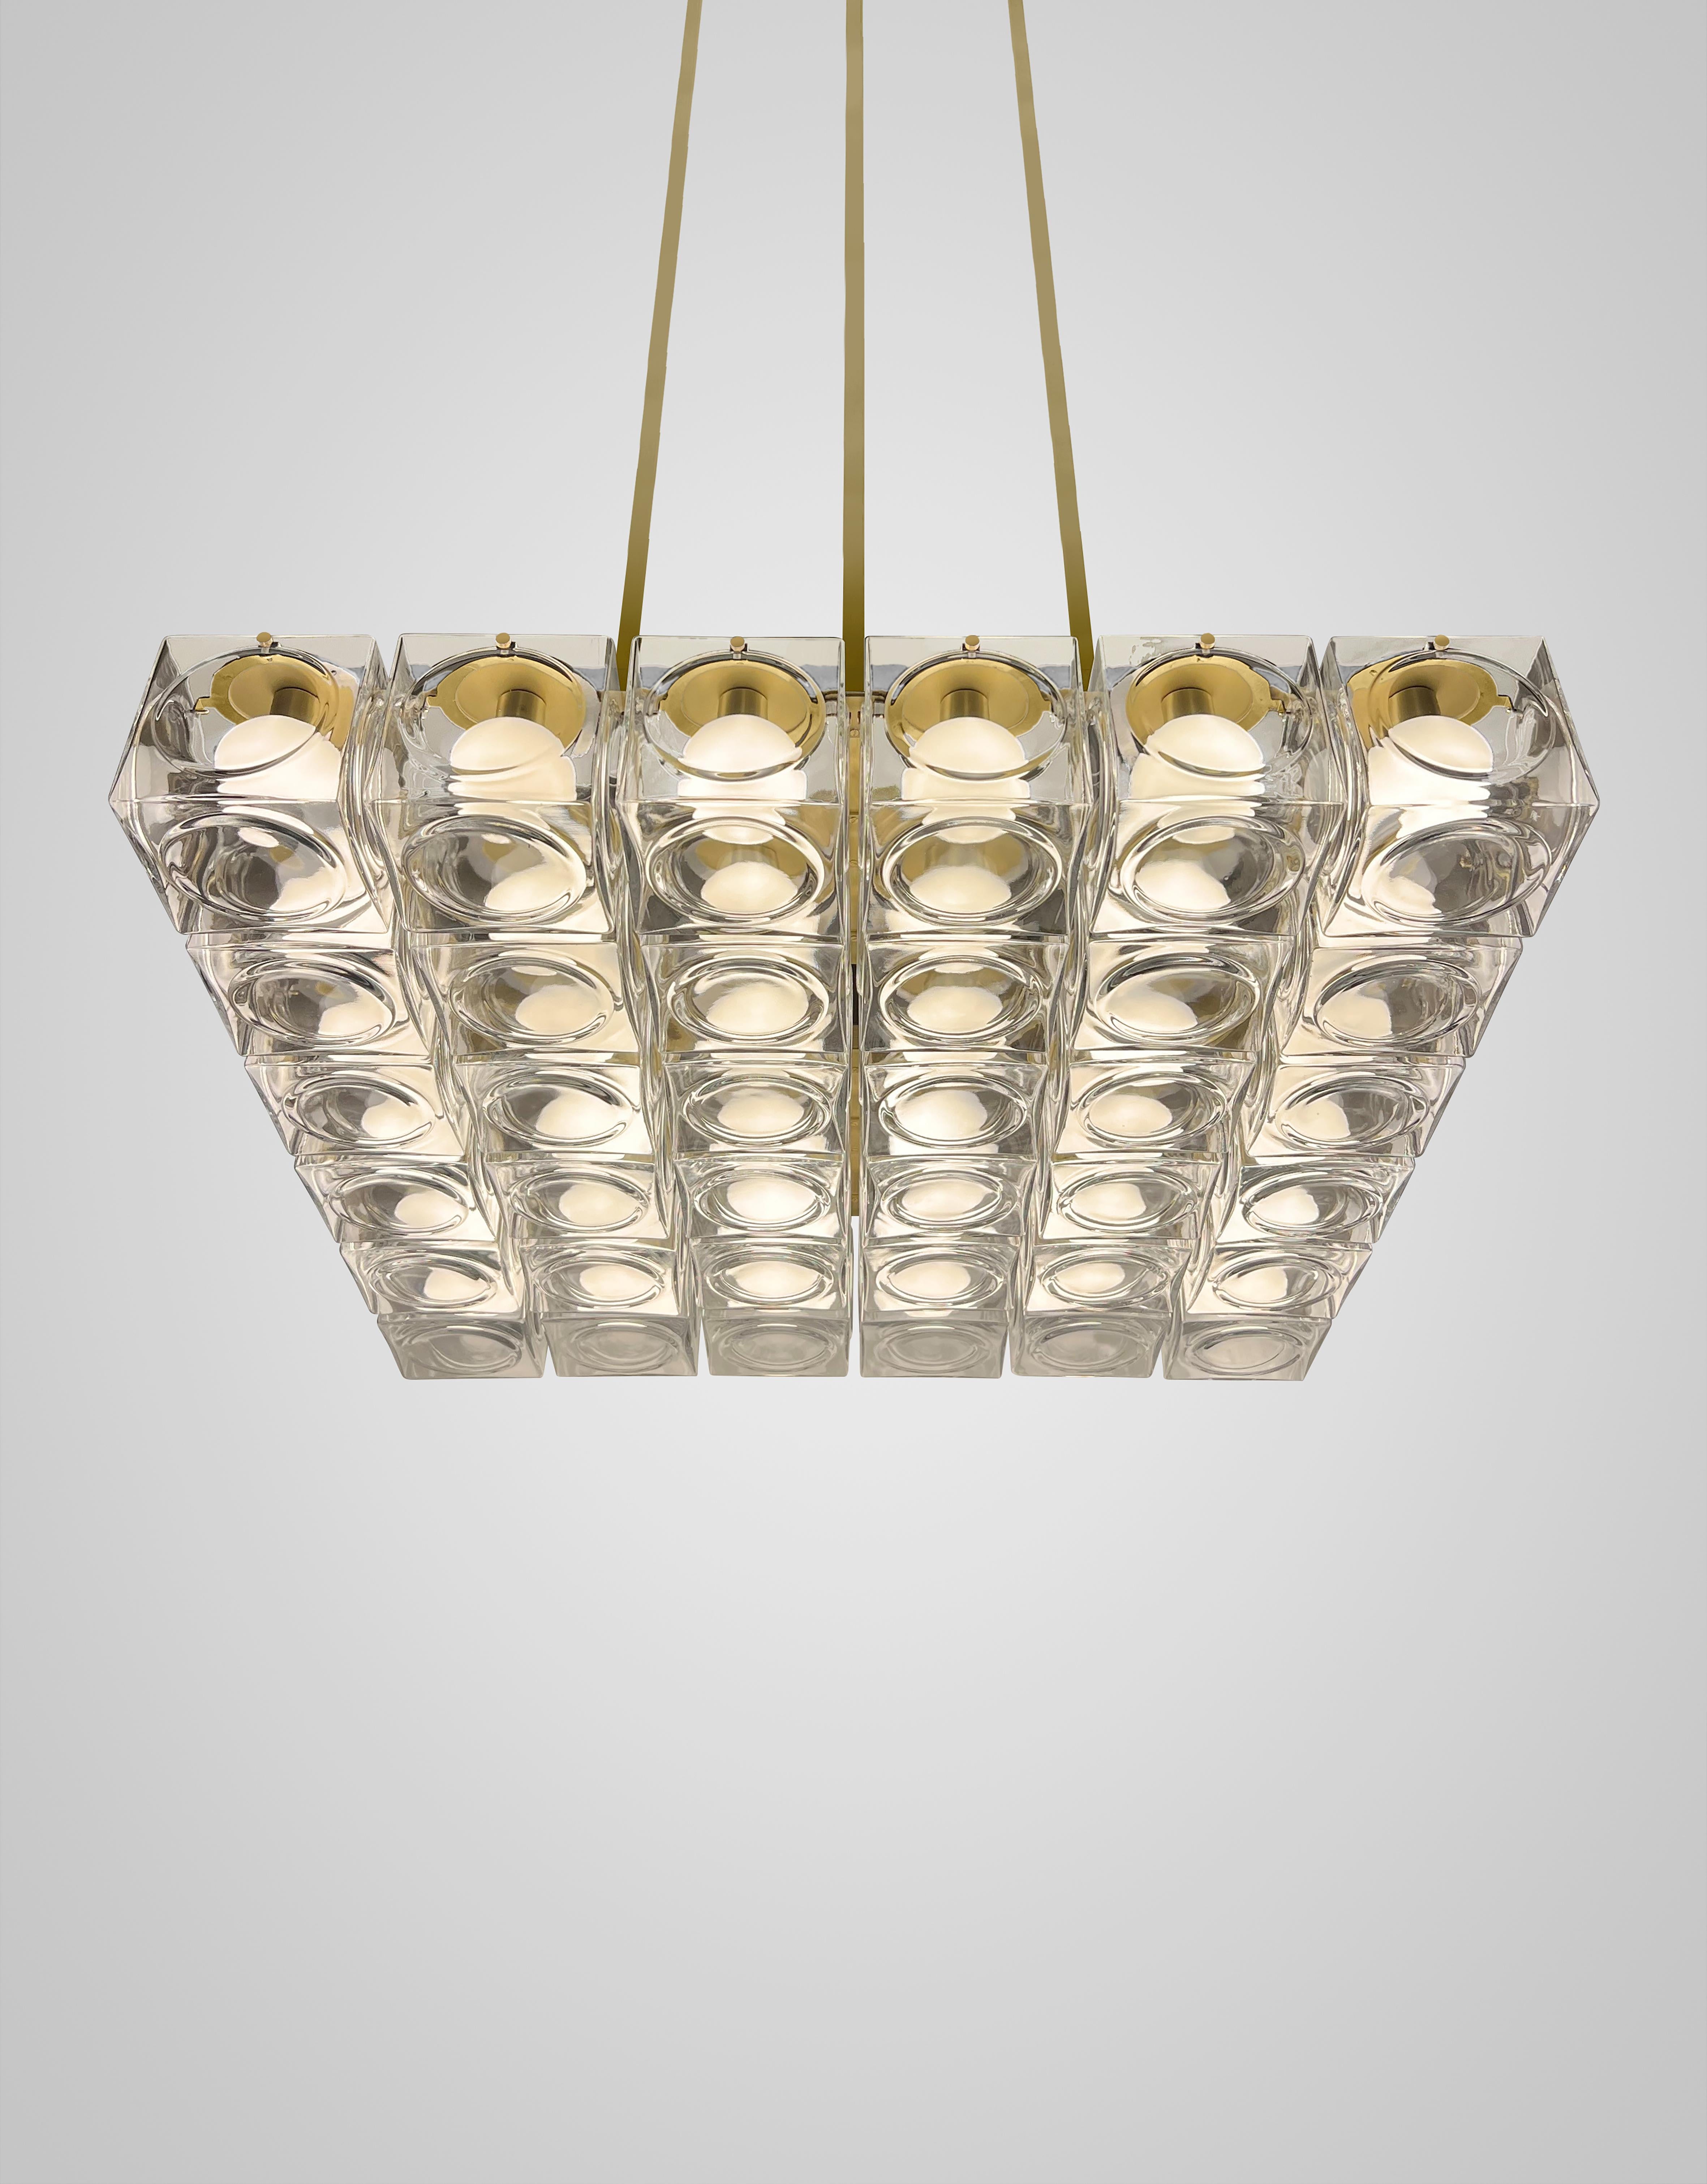 Contemporary Lee Broom - Chant 6x6 Chandelier For Sale